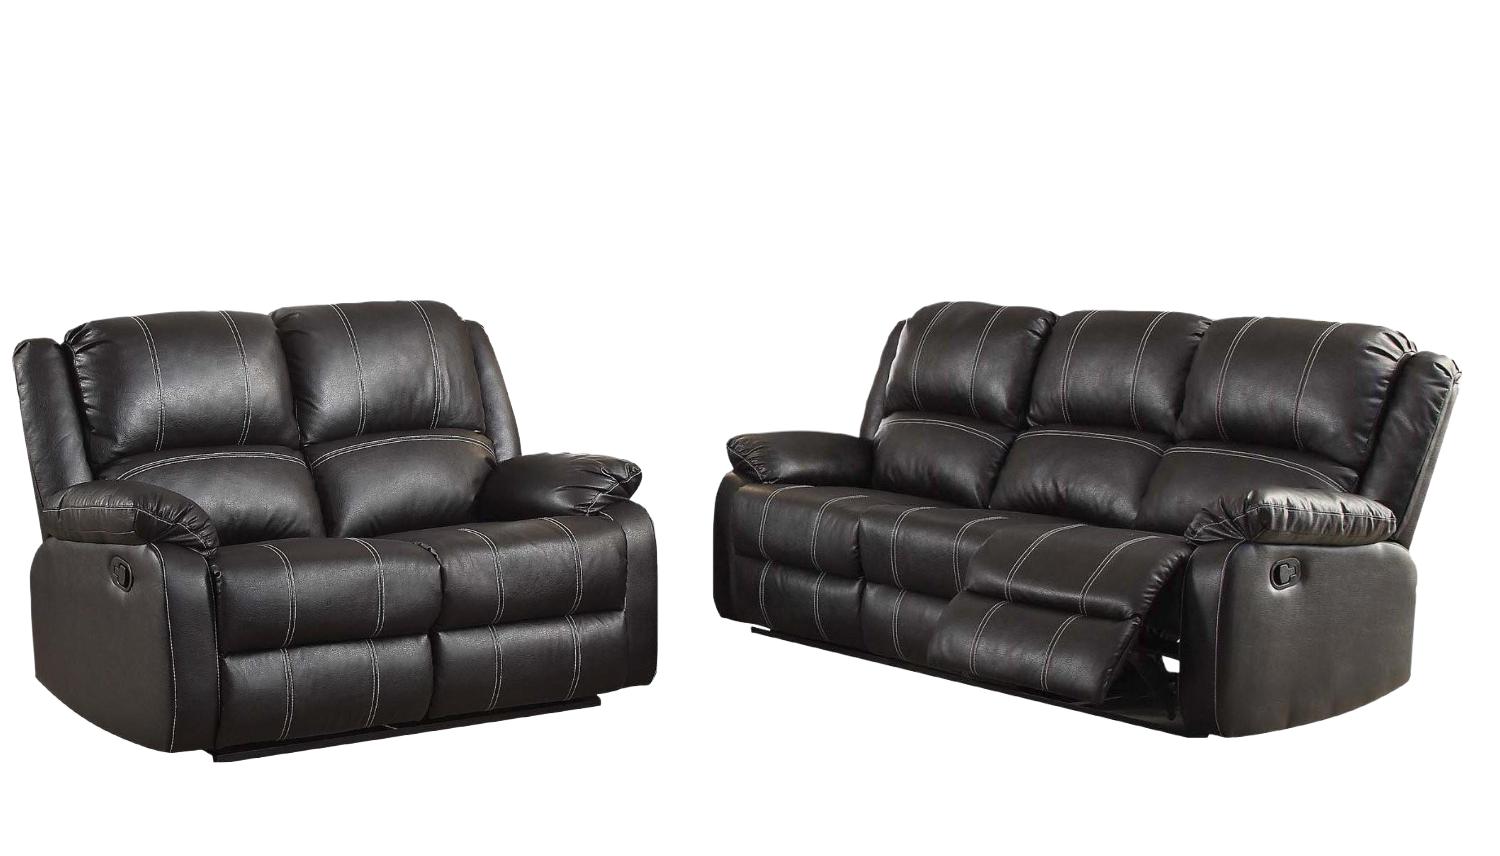 Modern Sofa and Loveseat Set Zuriel 52285-2pcs in Black Faux Leather